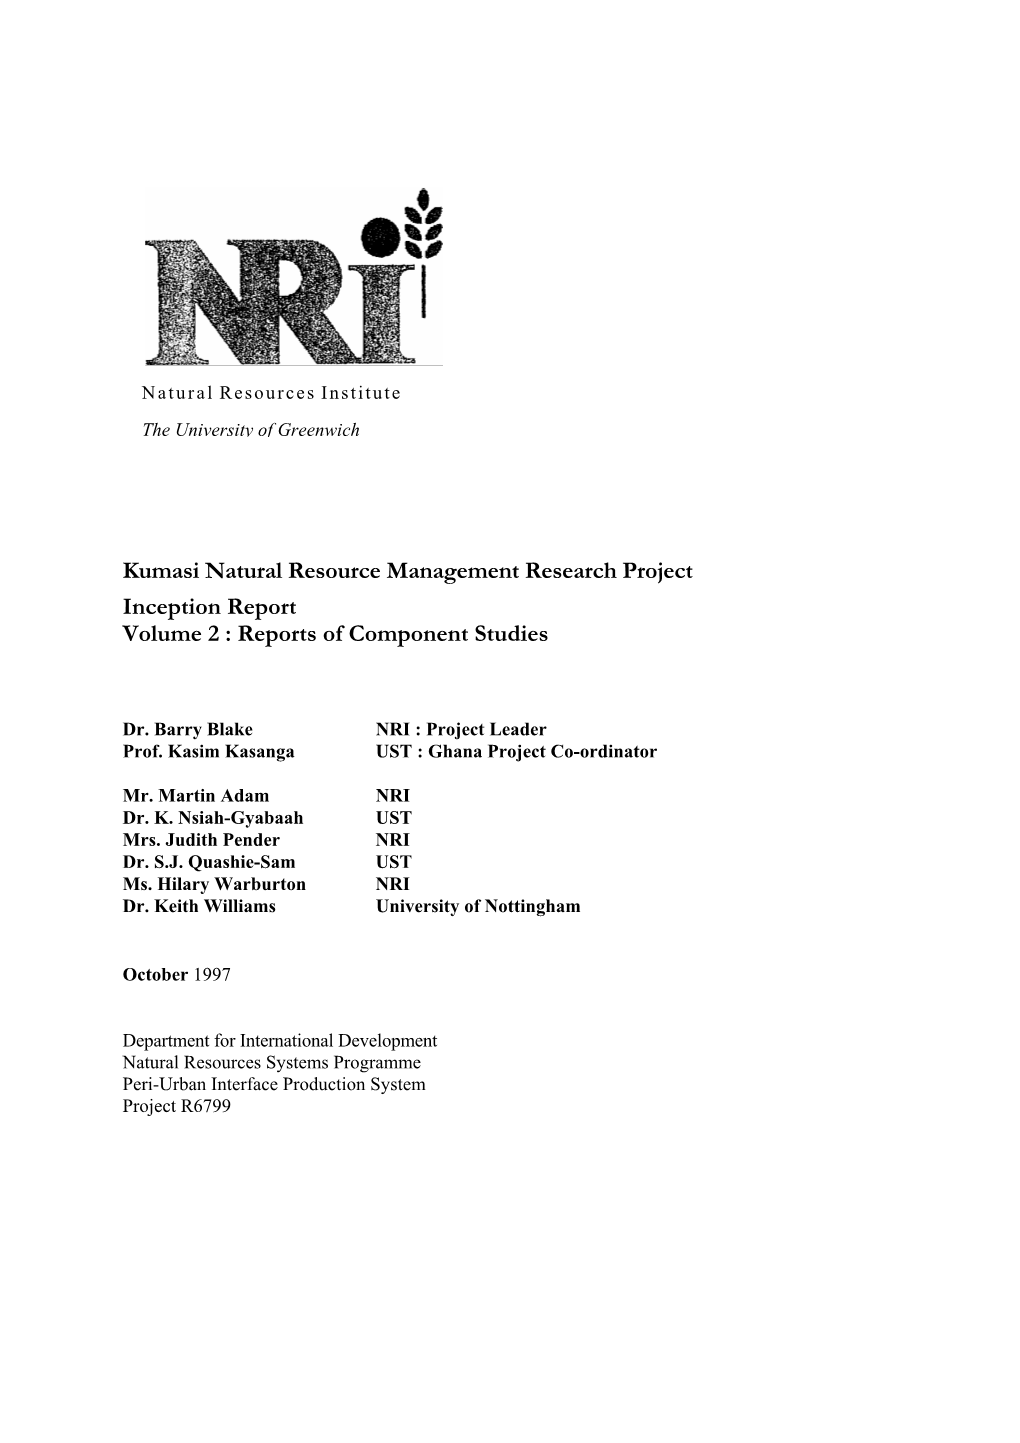 Kumasi Natural Resource Management Research Project Inception Report Volume 2 : Reports of Component Studies